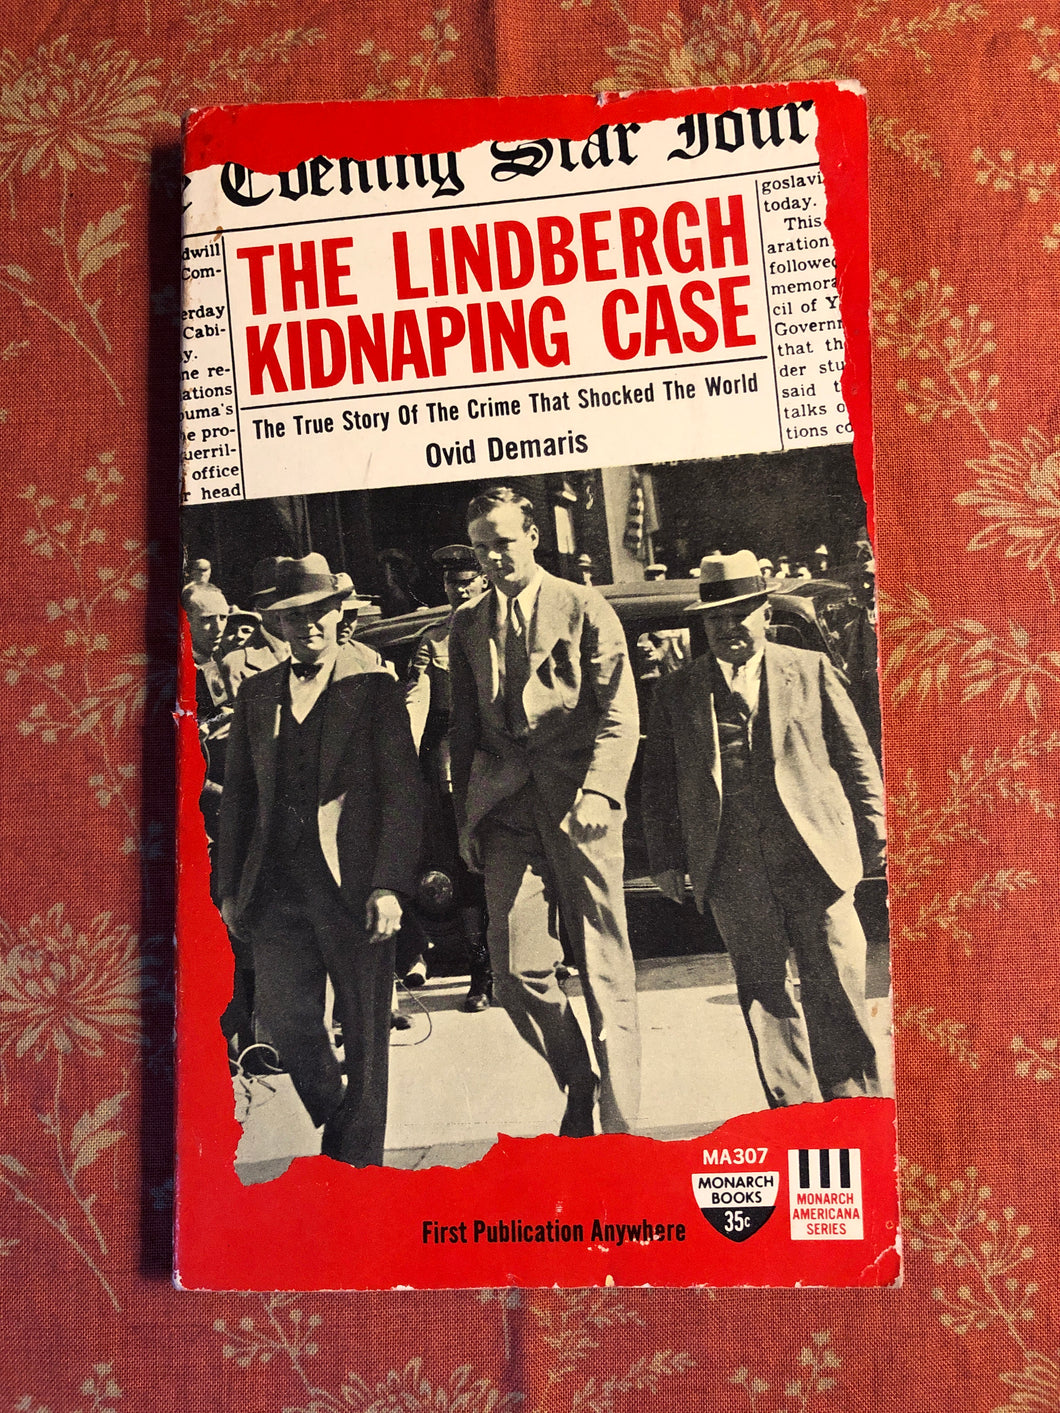 The Lindbergh Kidnaping Case: The True Story Of The Crime That Shocked The World